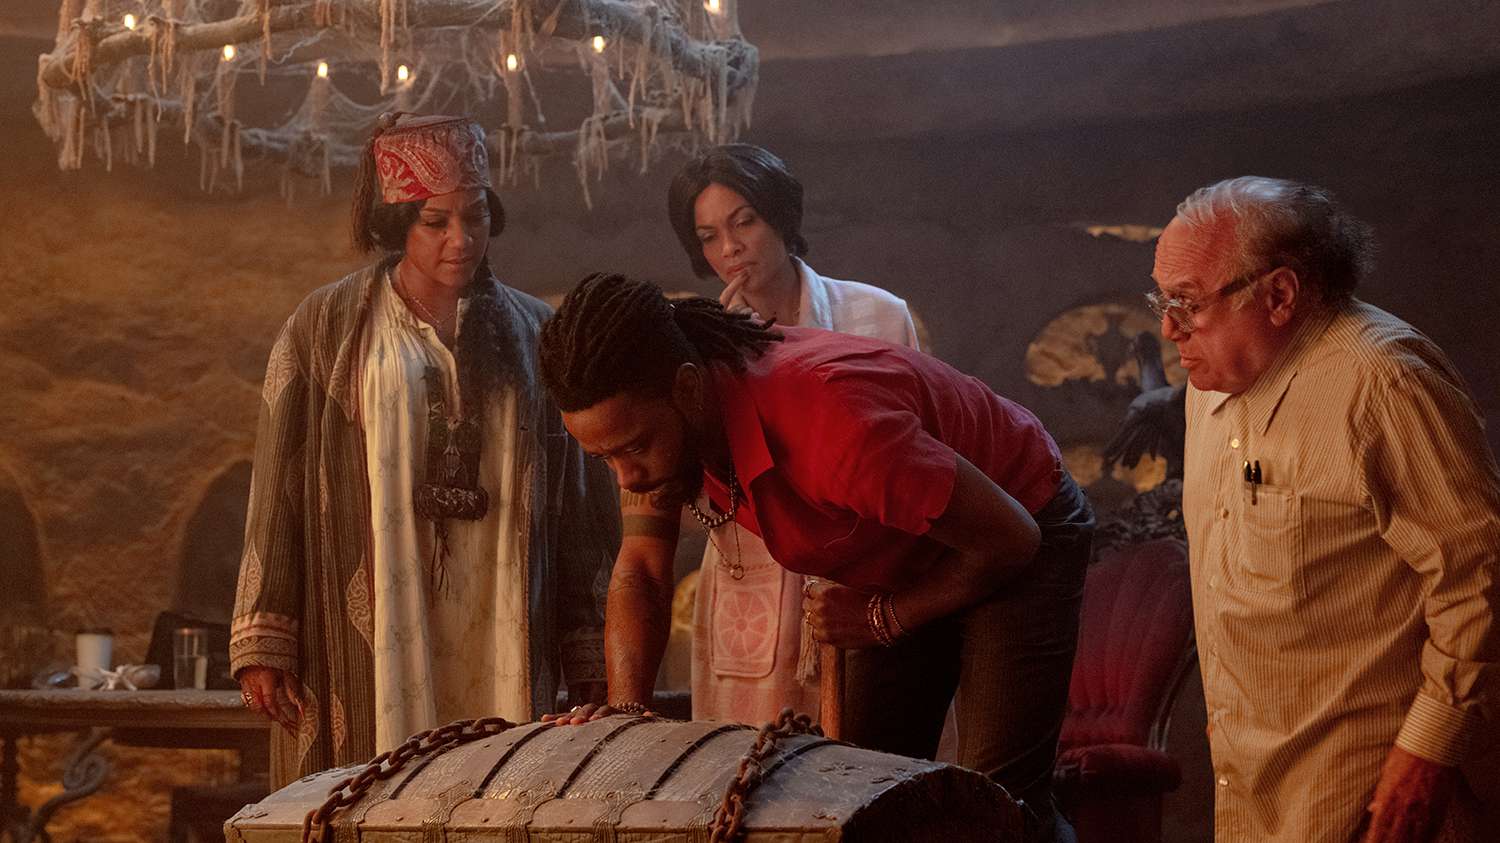 Tiffany Haddish as Harriet, Rosario Dawson as Gabbie, LaKeith Stanfield as Ben, and Danny DeVito as Bruce in Disney's live-action HAUNTED MANSION